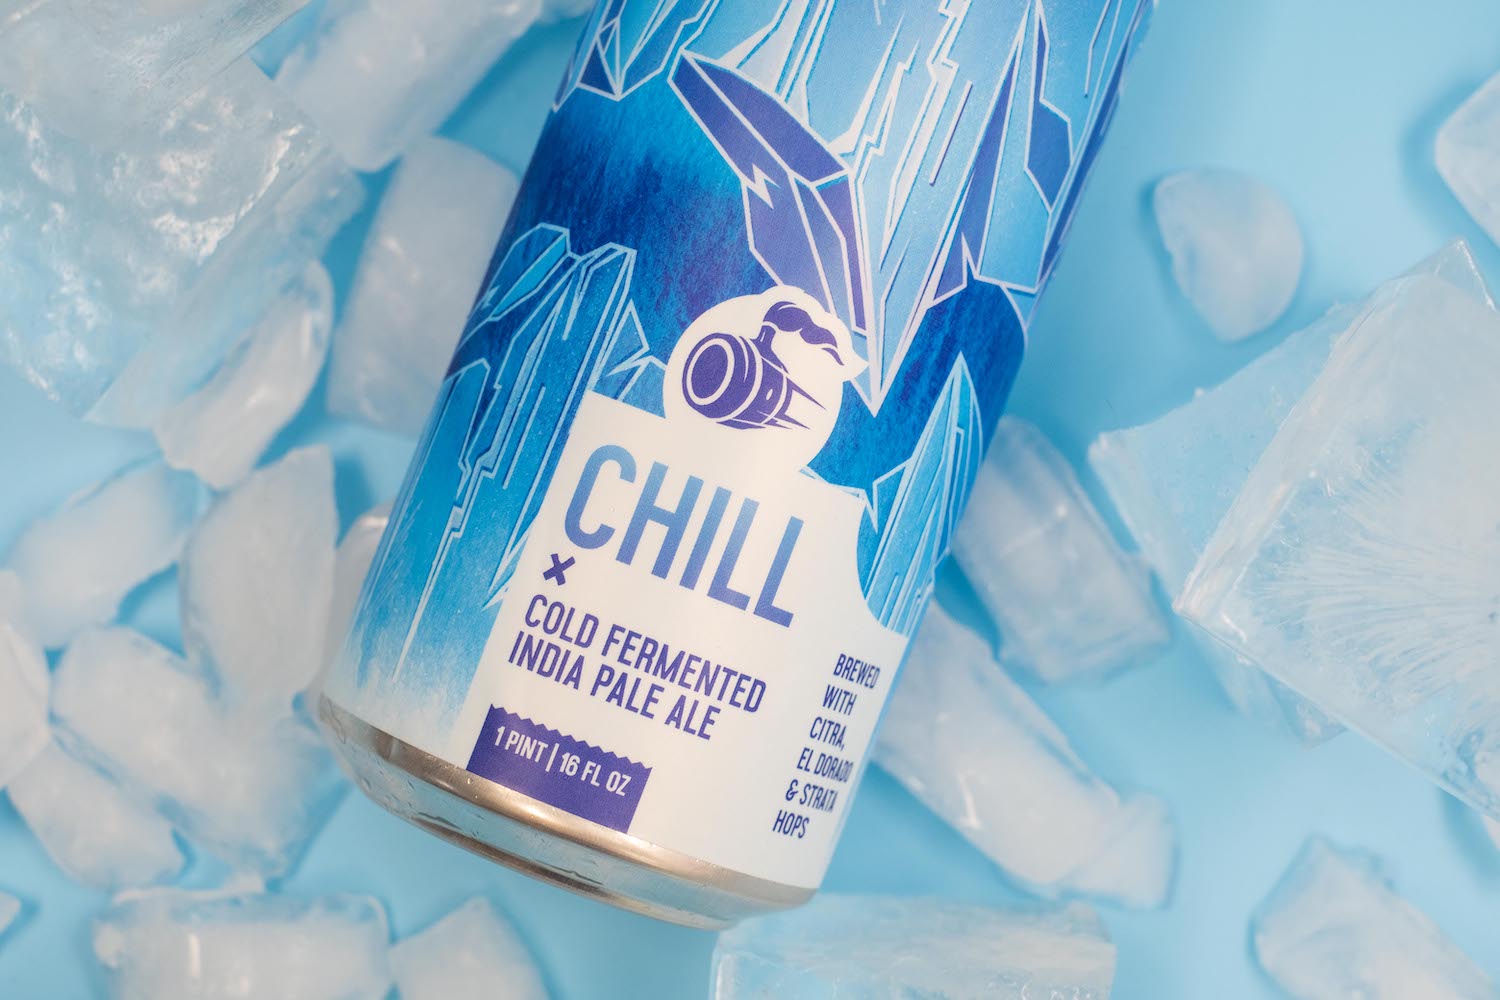 weldwerks chill cold ipa laying on ice cubes